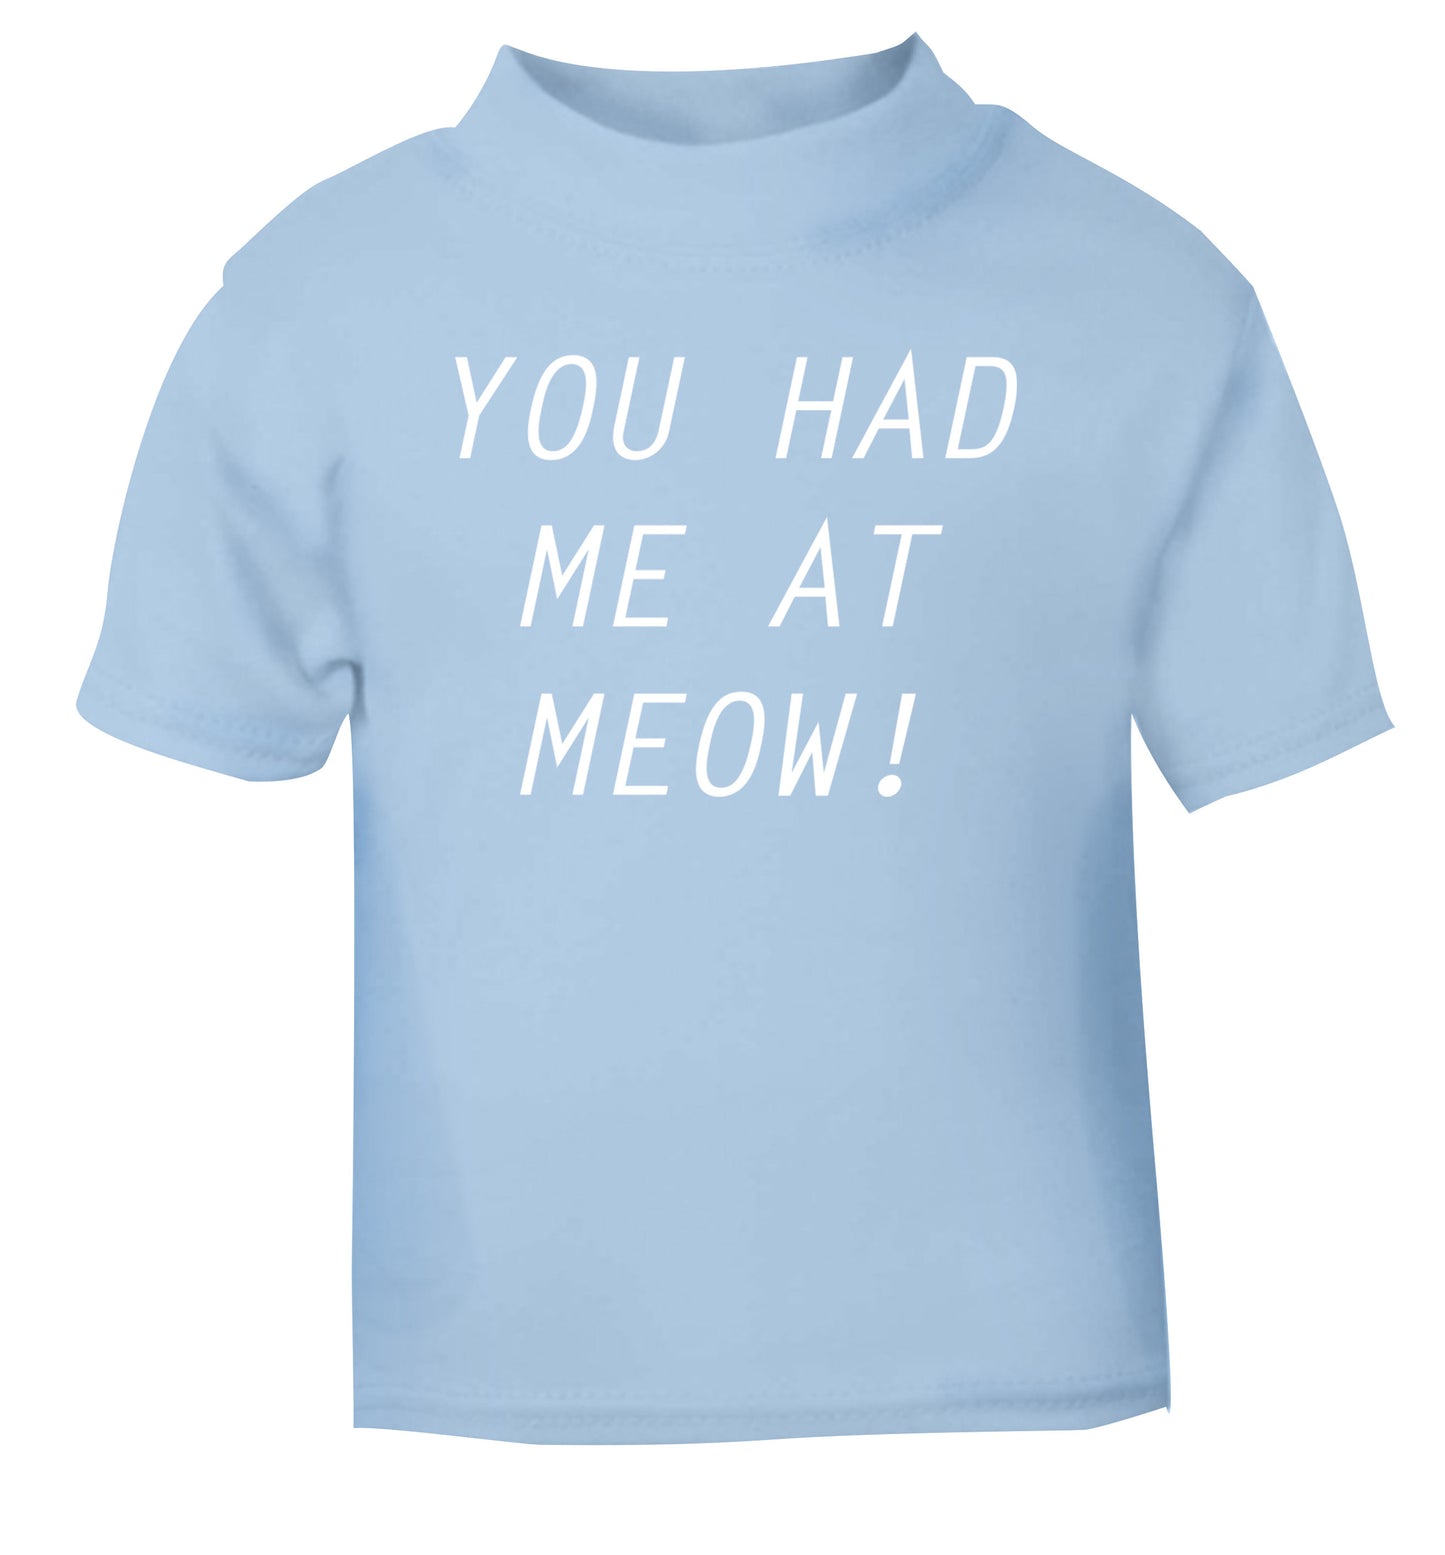 You had me at meow light blue Baby Toddler Tshirt 2 Years